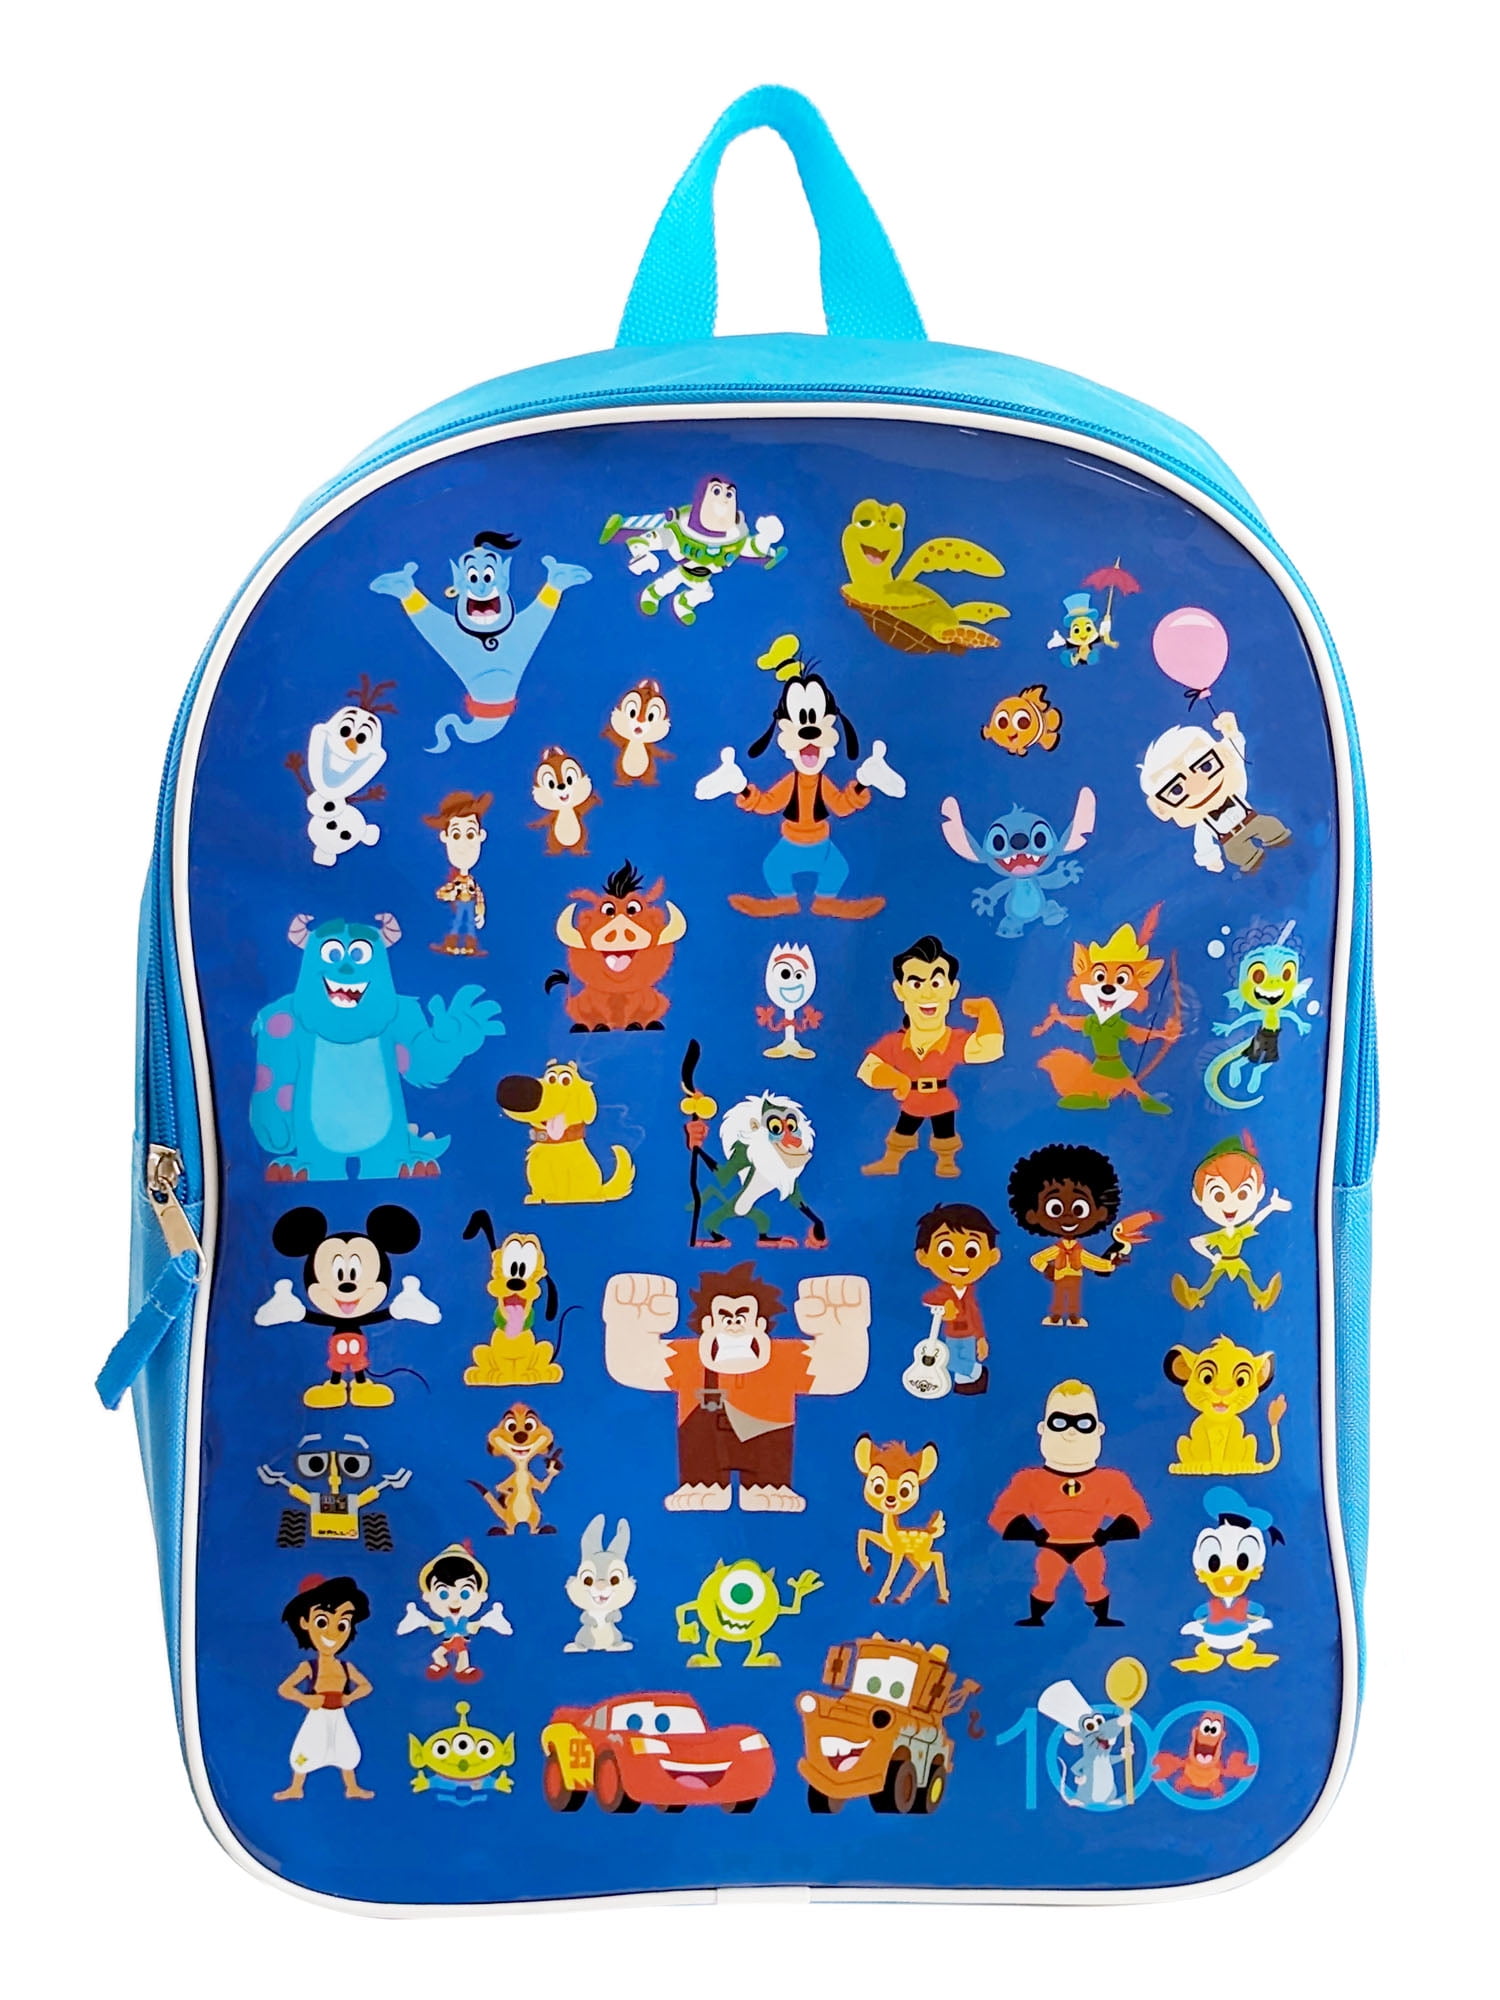 Disney Mickey Mouse Kids Shoulder Bags Cute Animation Children's